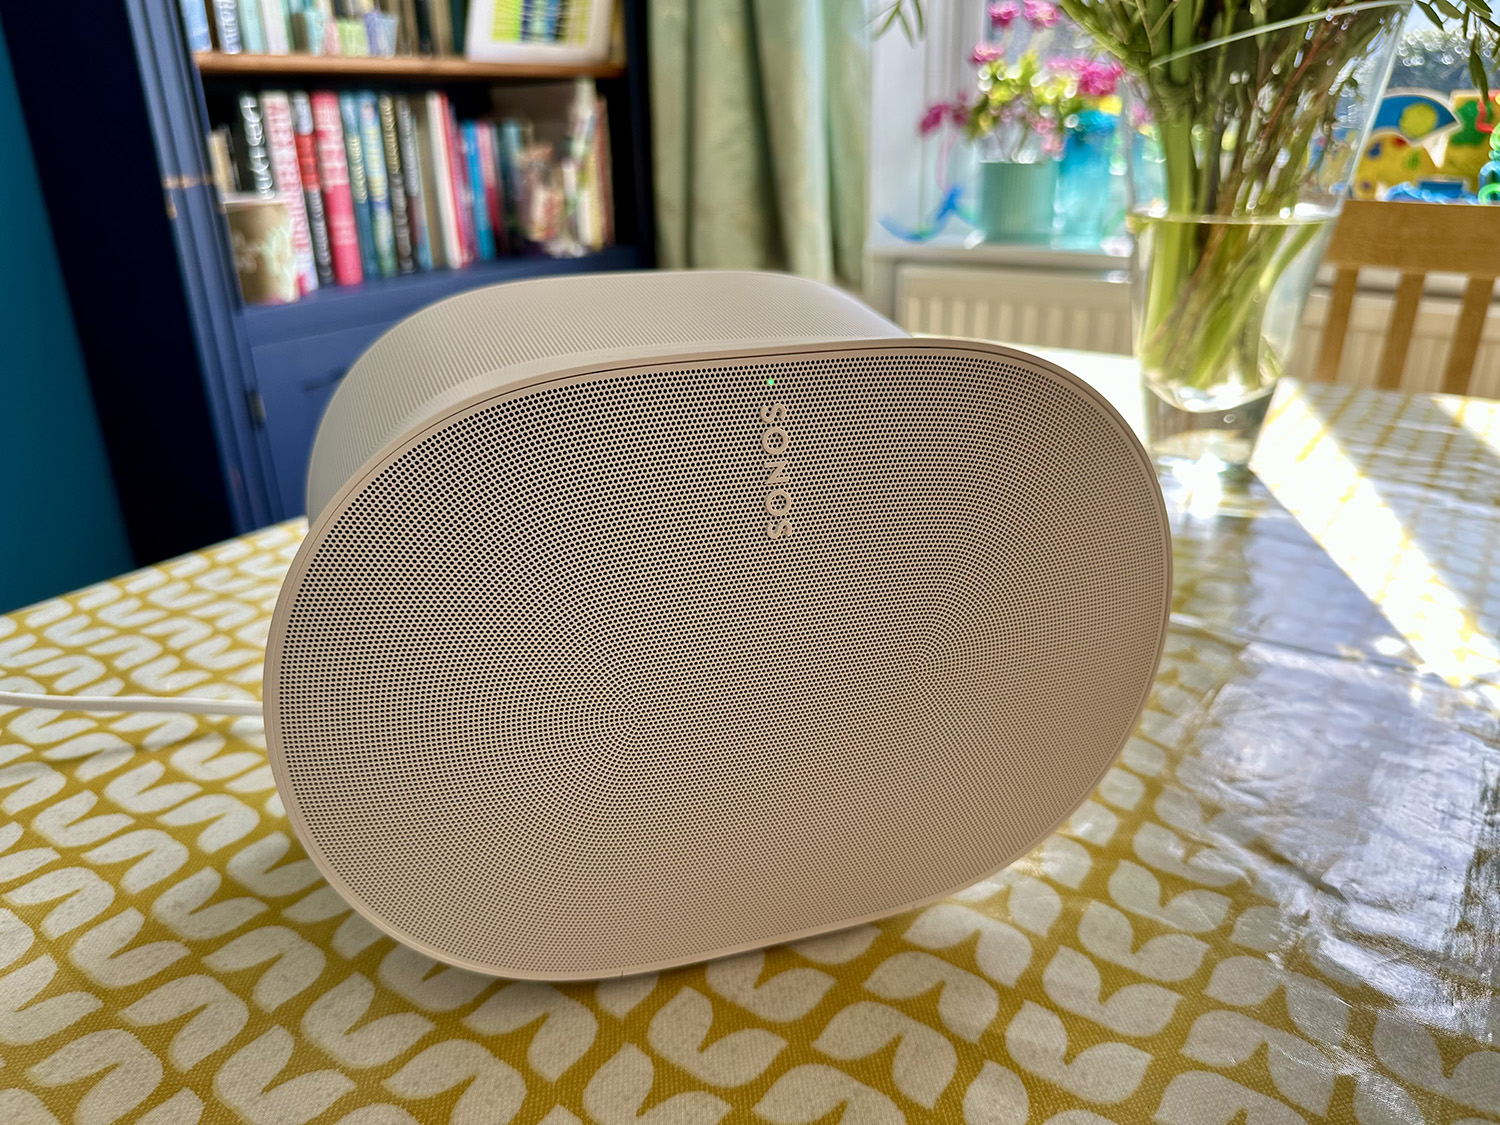 Sonos Era 300 Review: This Dolby Atmos Speaker Is Excellent, But